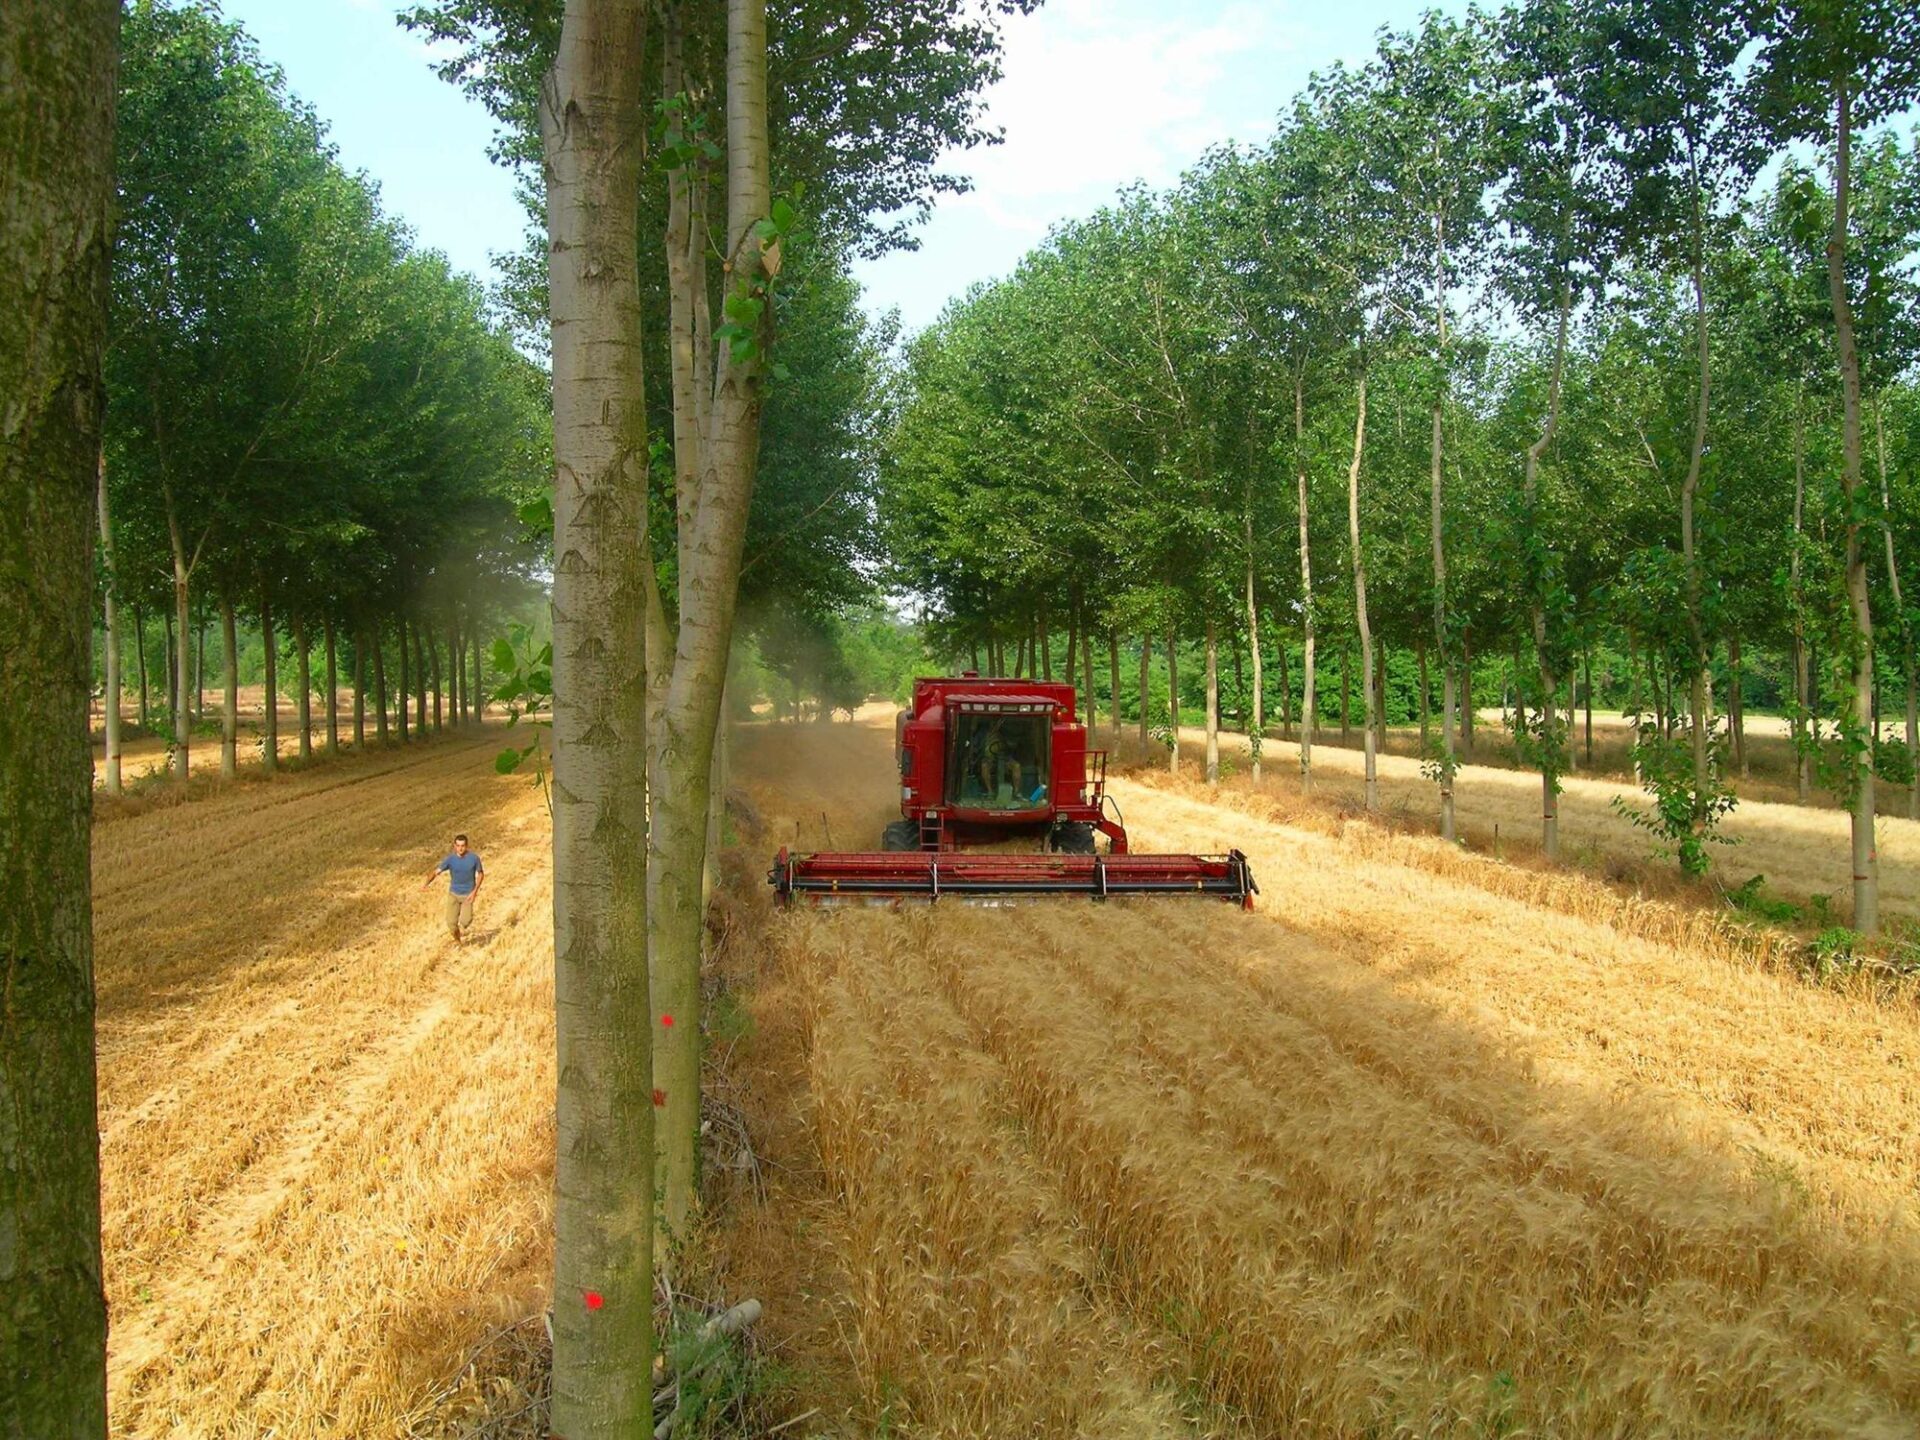 Alley cropping agroforestry in France.